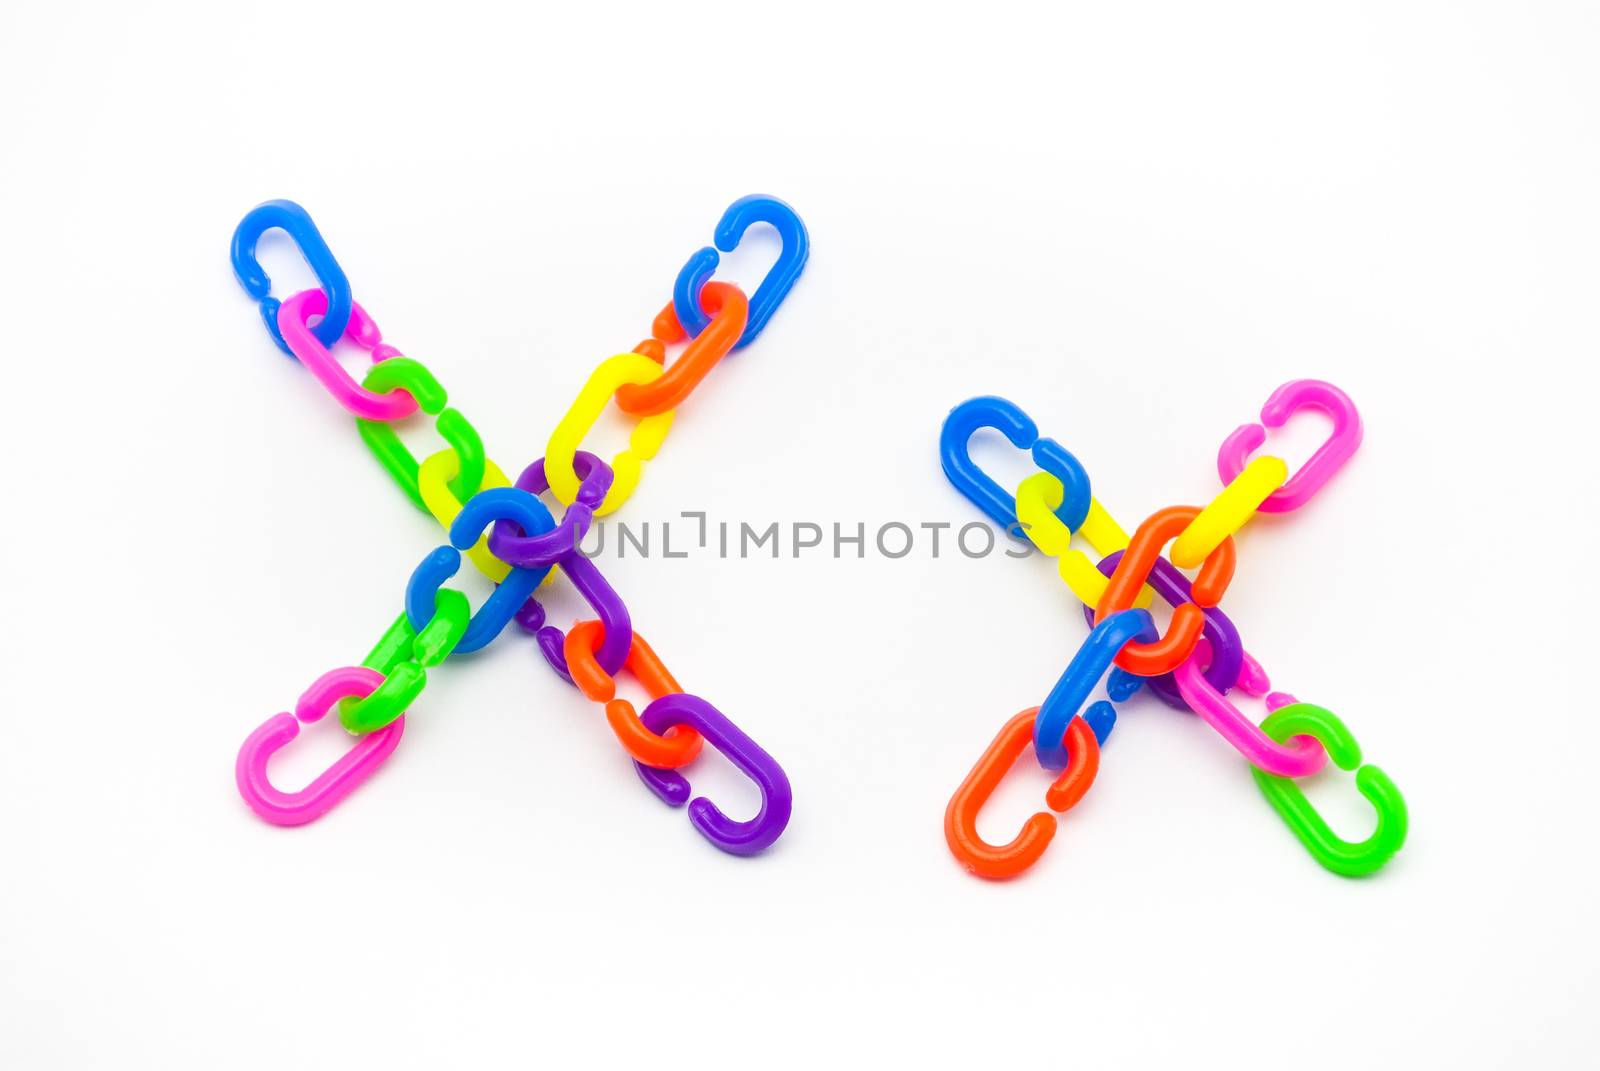 X and x Alphabet, Created by Colorful Plastic Chain.